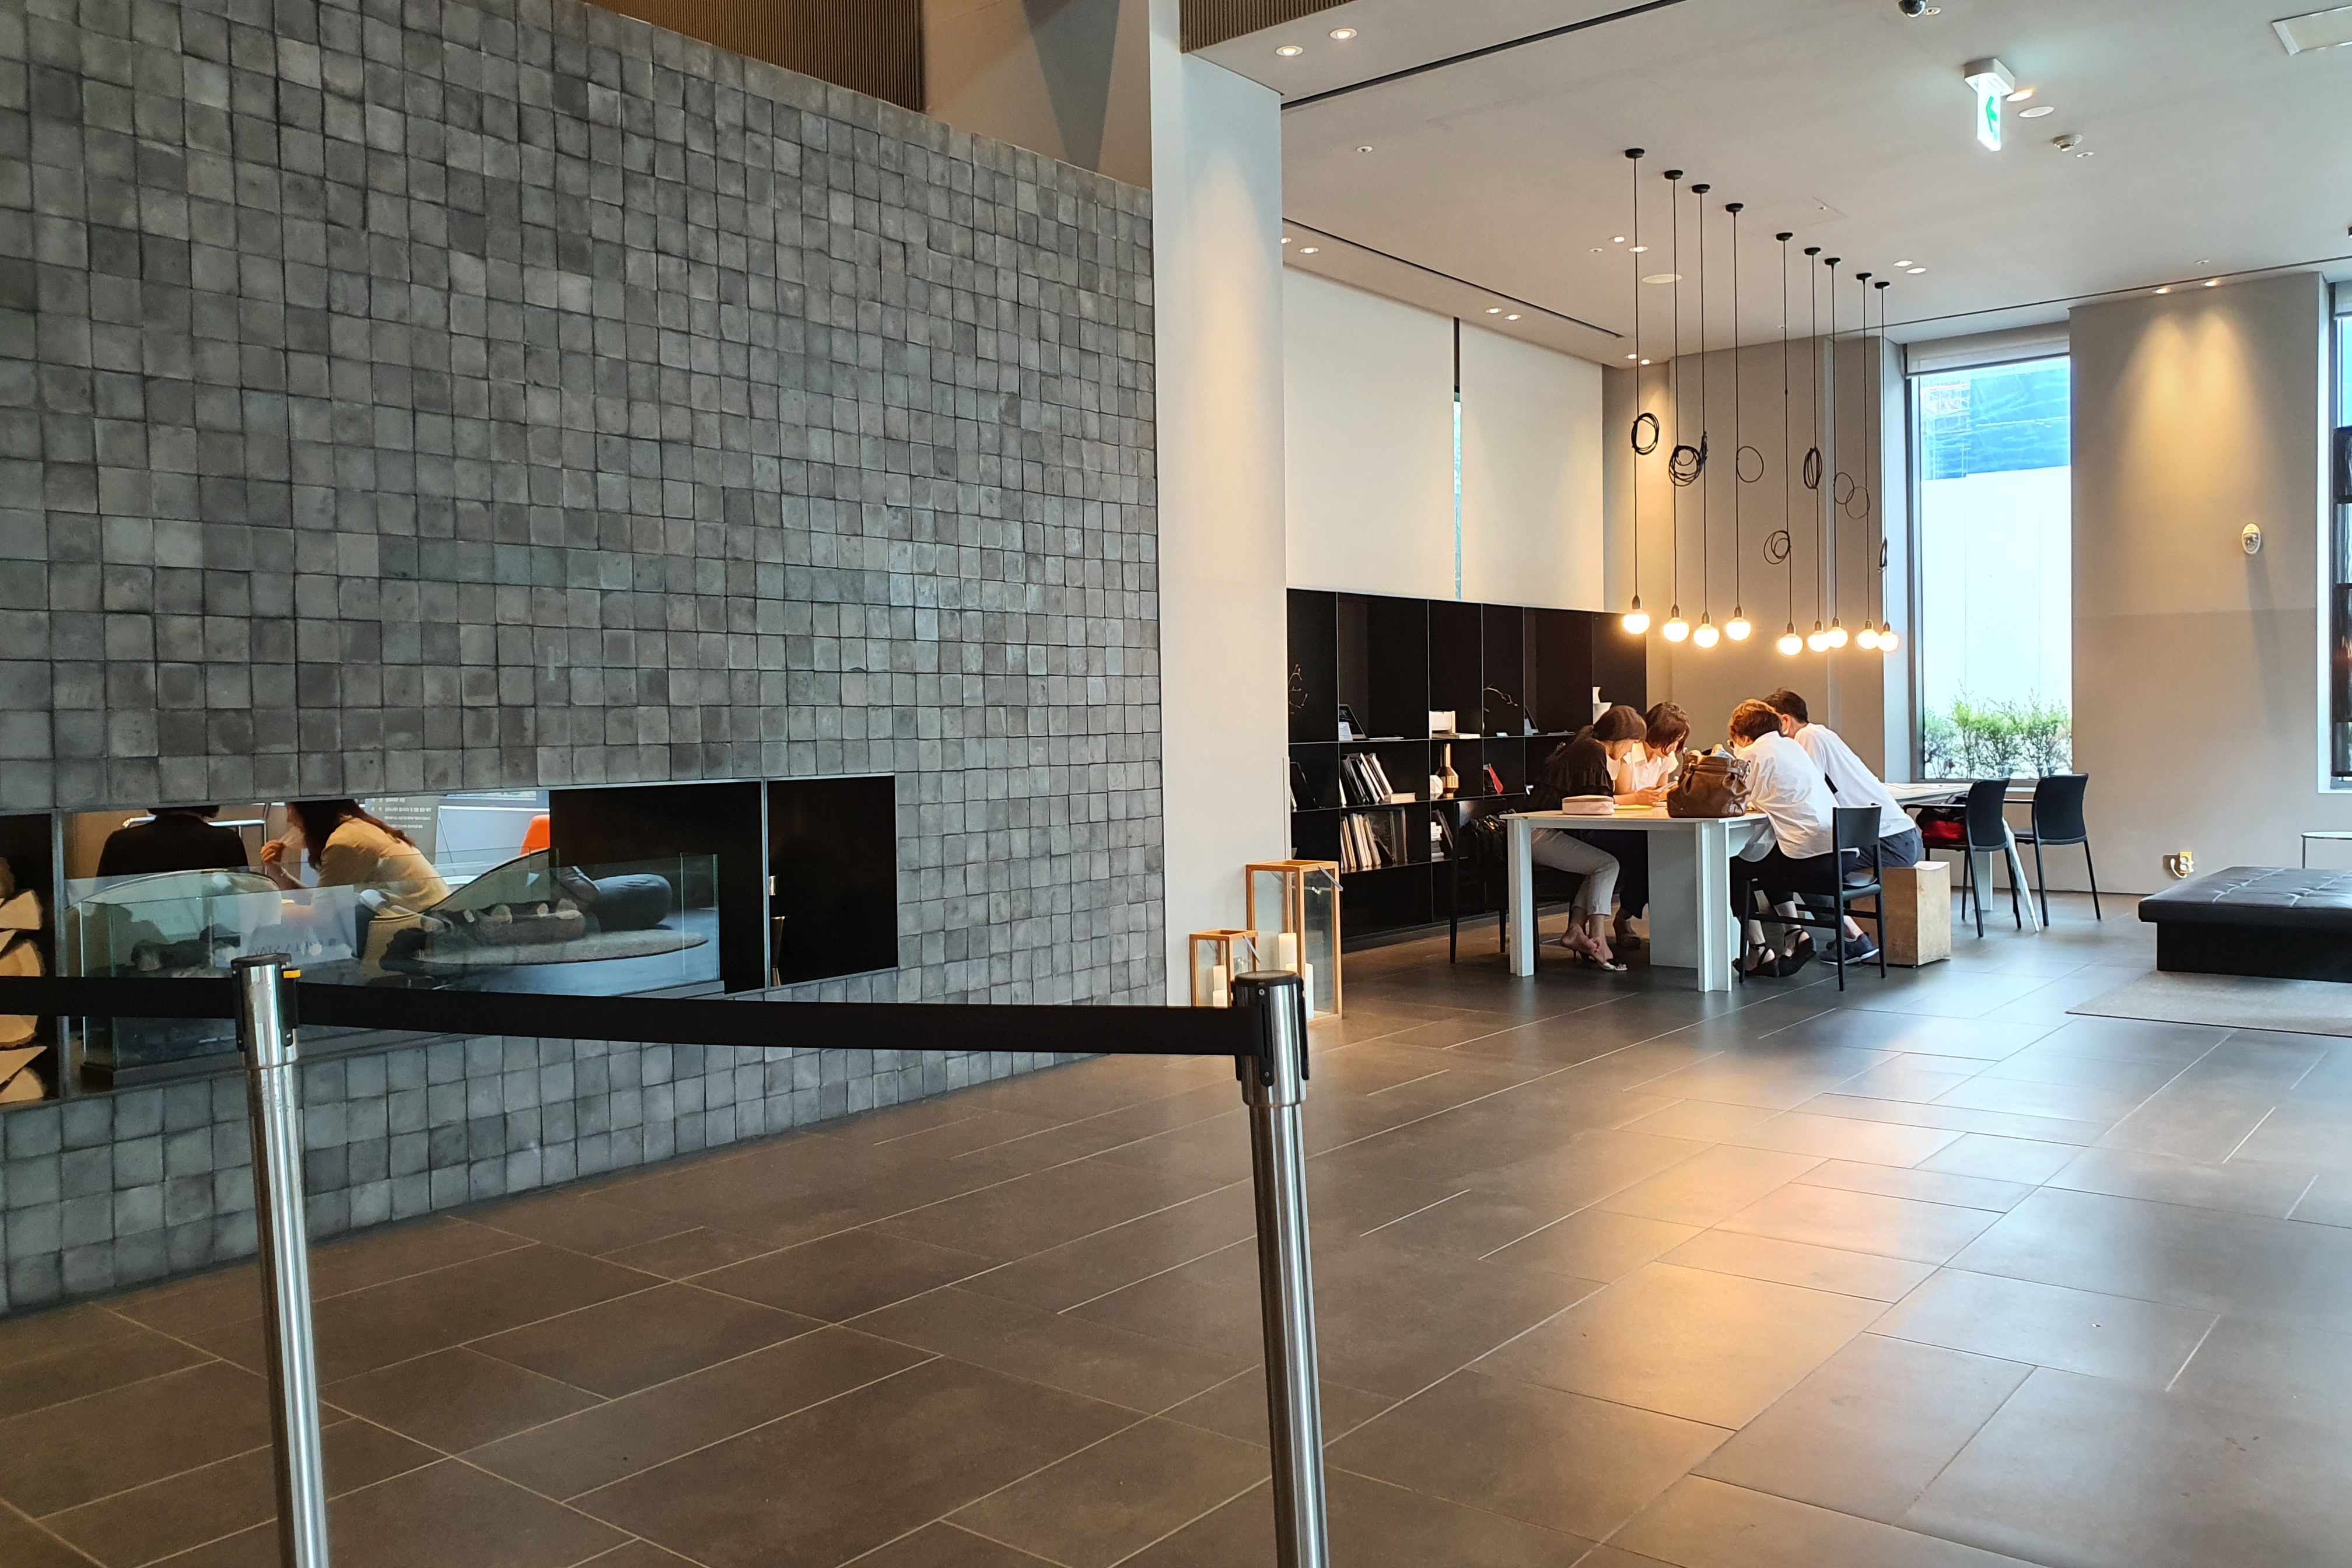 Shilla Stay Seocho2 : A spacious resting area with people sitting around the table at the corner